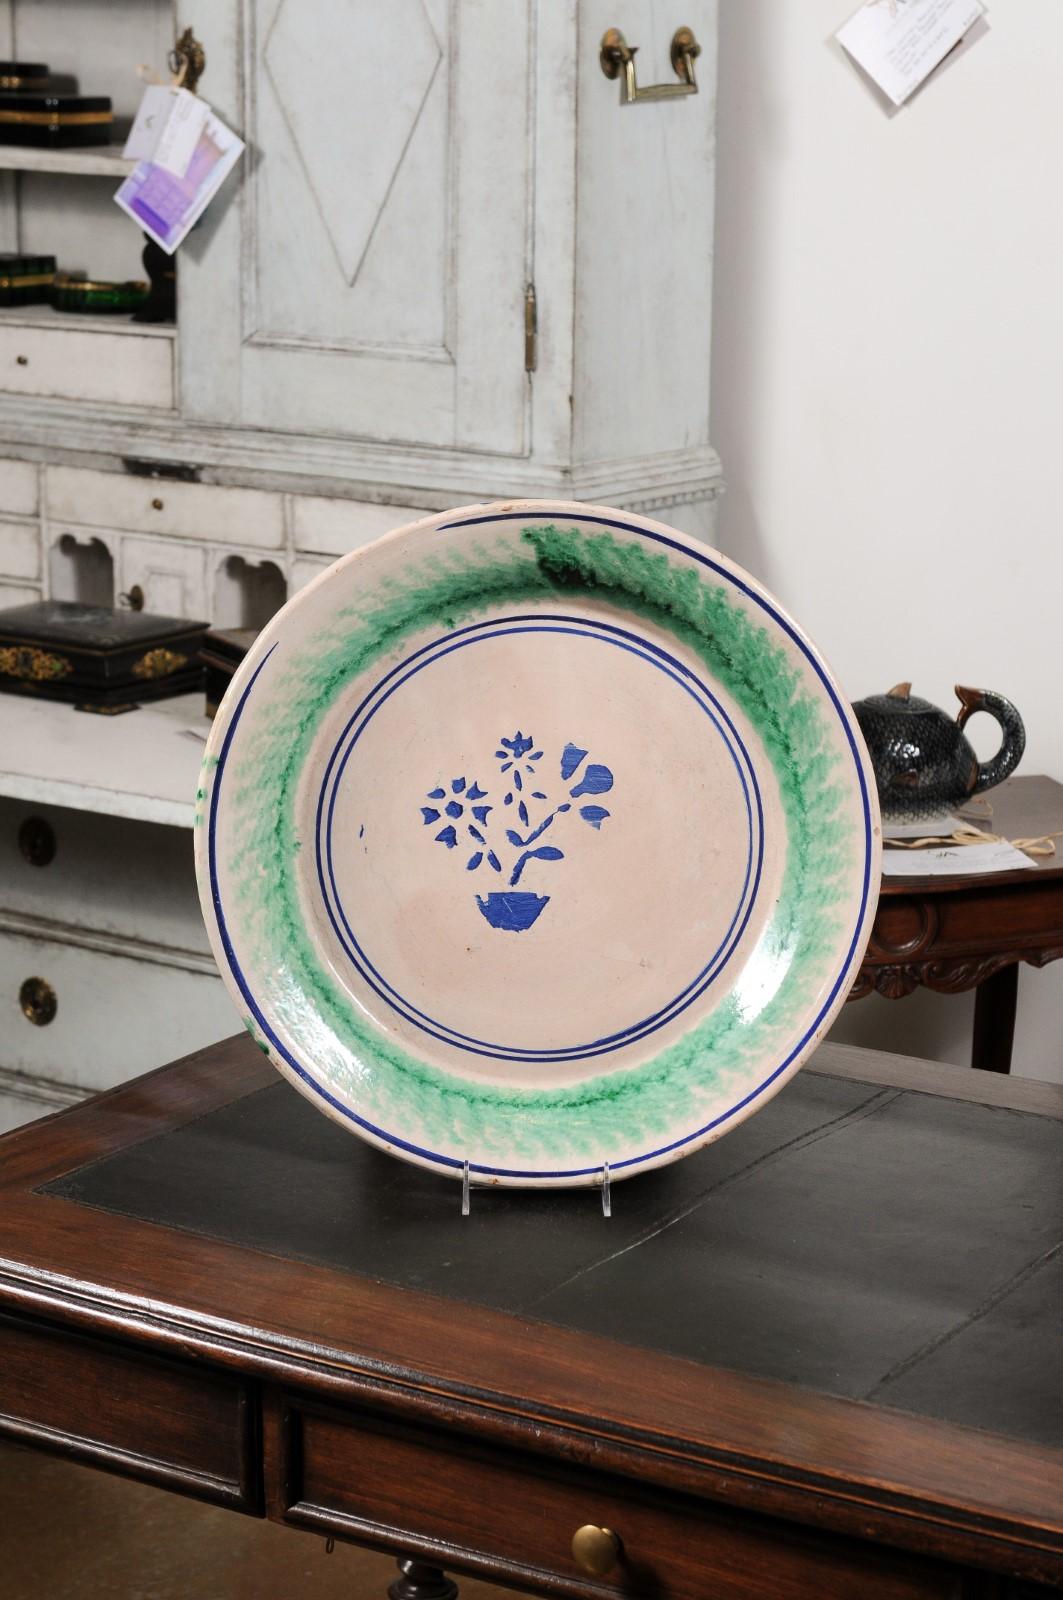 An Italian pottery platter from the late 19th century, with stylized blue floral motifs and green accents. Created in Italy during the late decade of the 19th century, this pottery platter features blue and green tones alternating with one another.